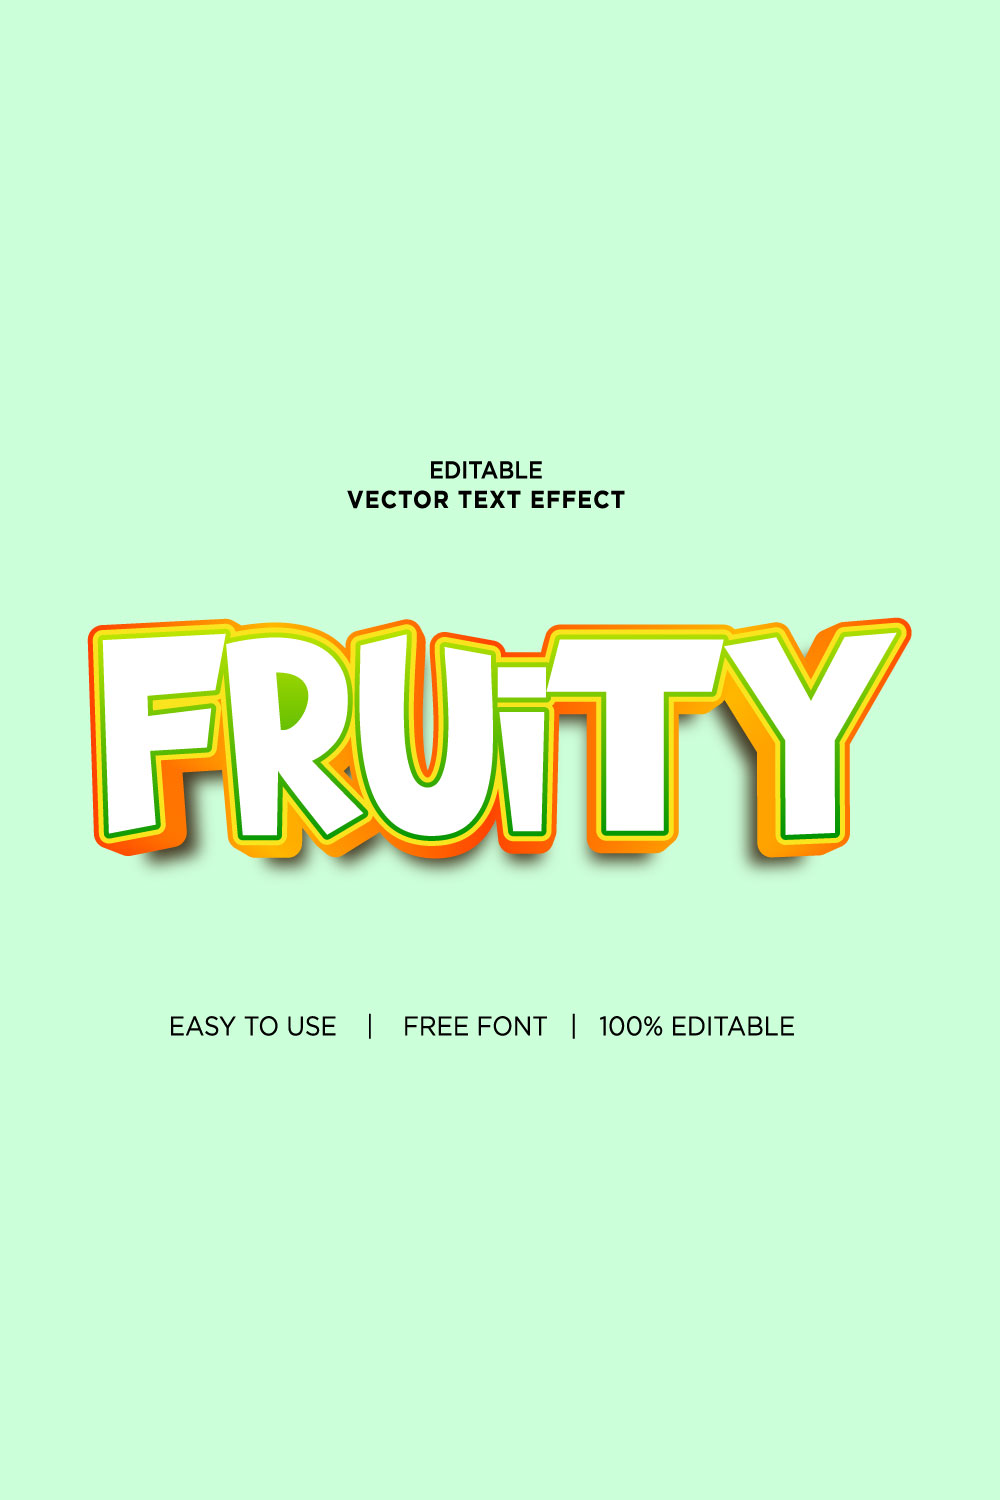 Fruity 3d text effects vector illustrations New Text style eps files editable text effect vector, 3d editable text effect vector, editable font effect vector, pinterest preview image.